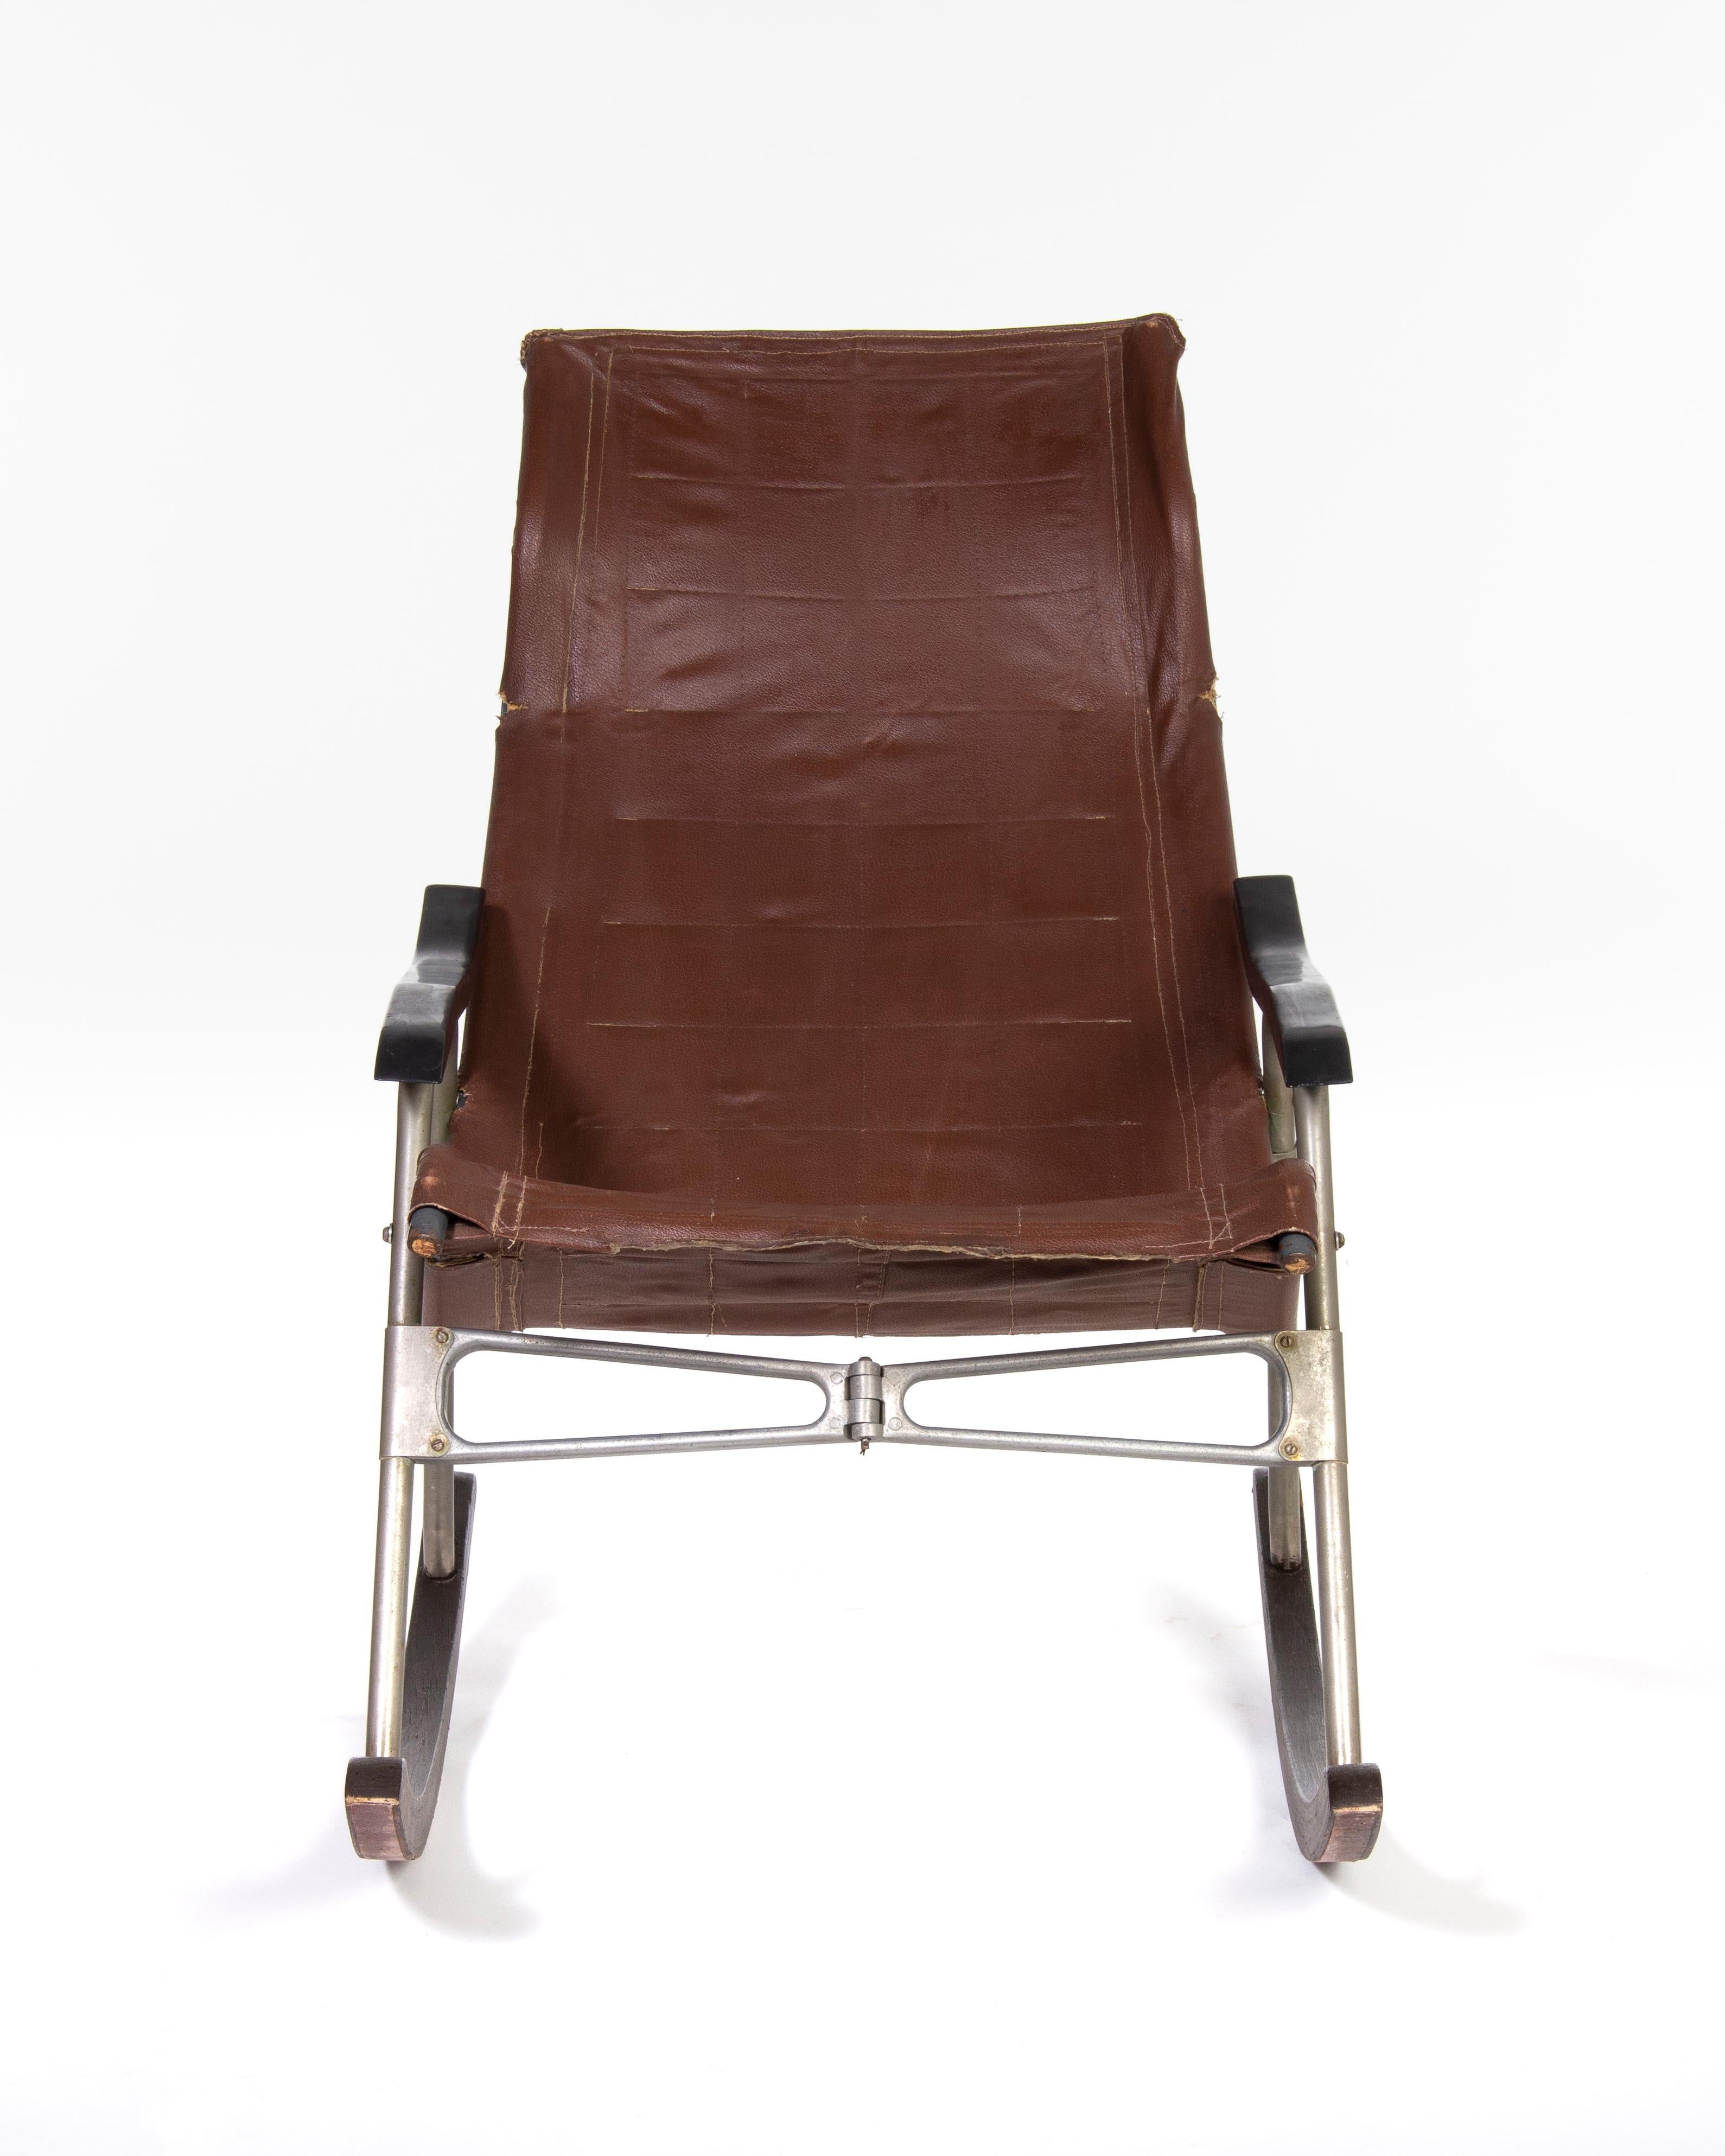 Brown leather rocking chair, designed by Japanese Takeshi Nii in the 1950s.
The chair is foldable in the middle to collapsed state of 14 cm width.
 